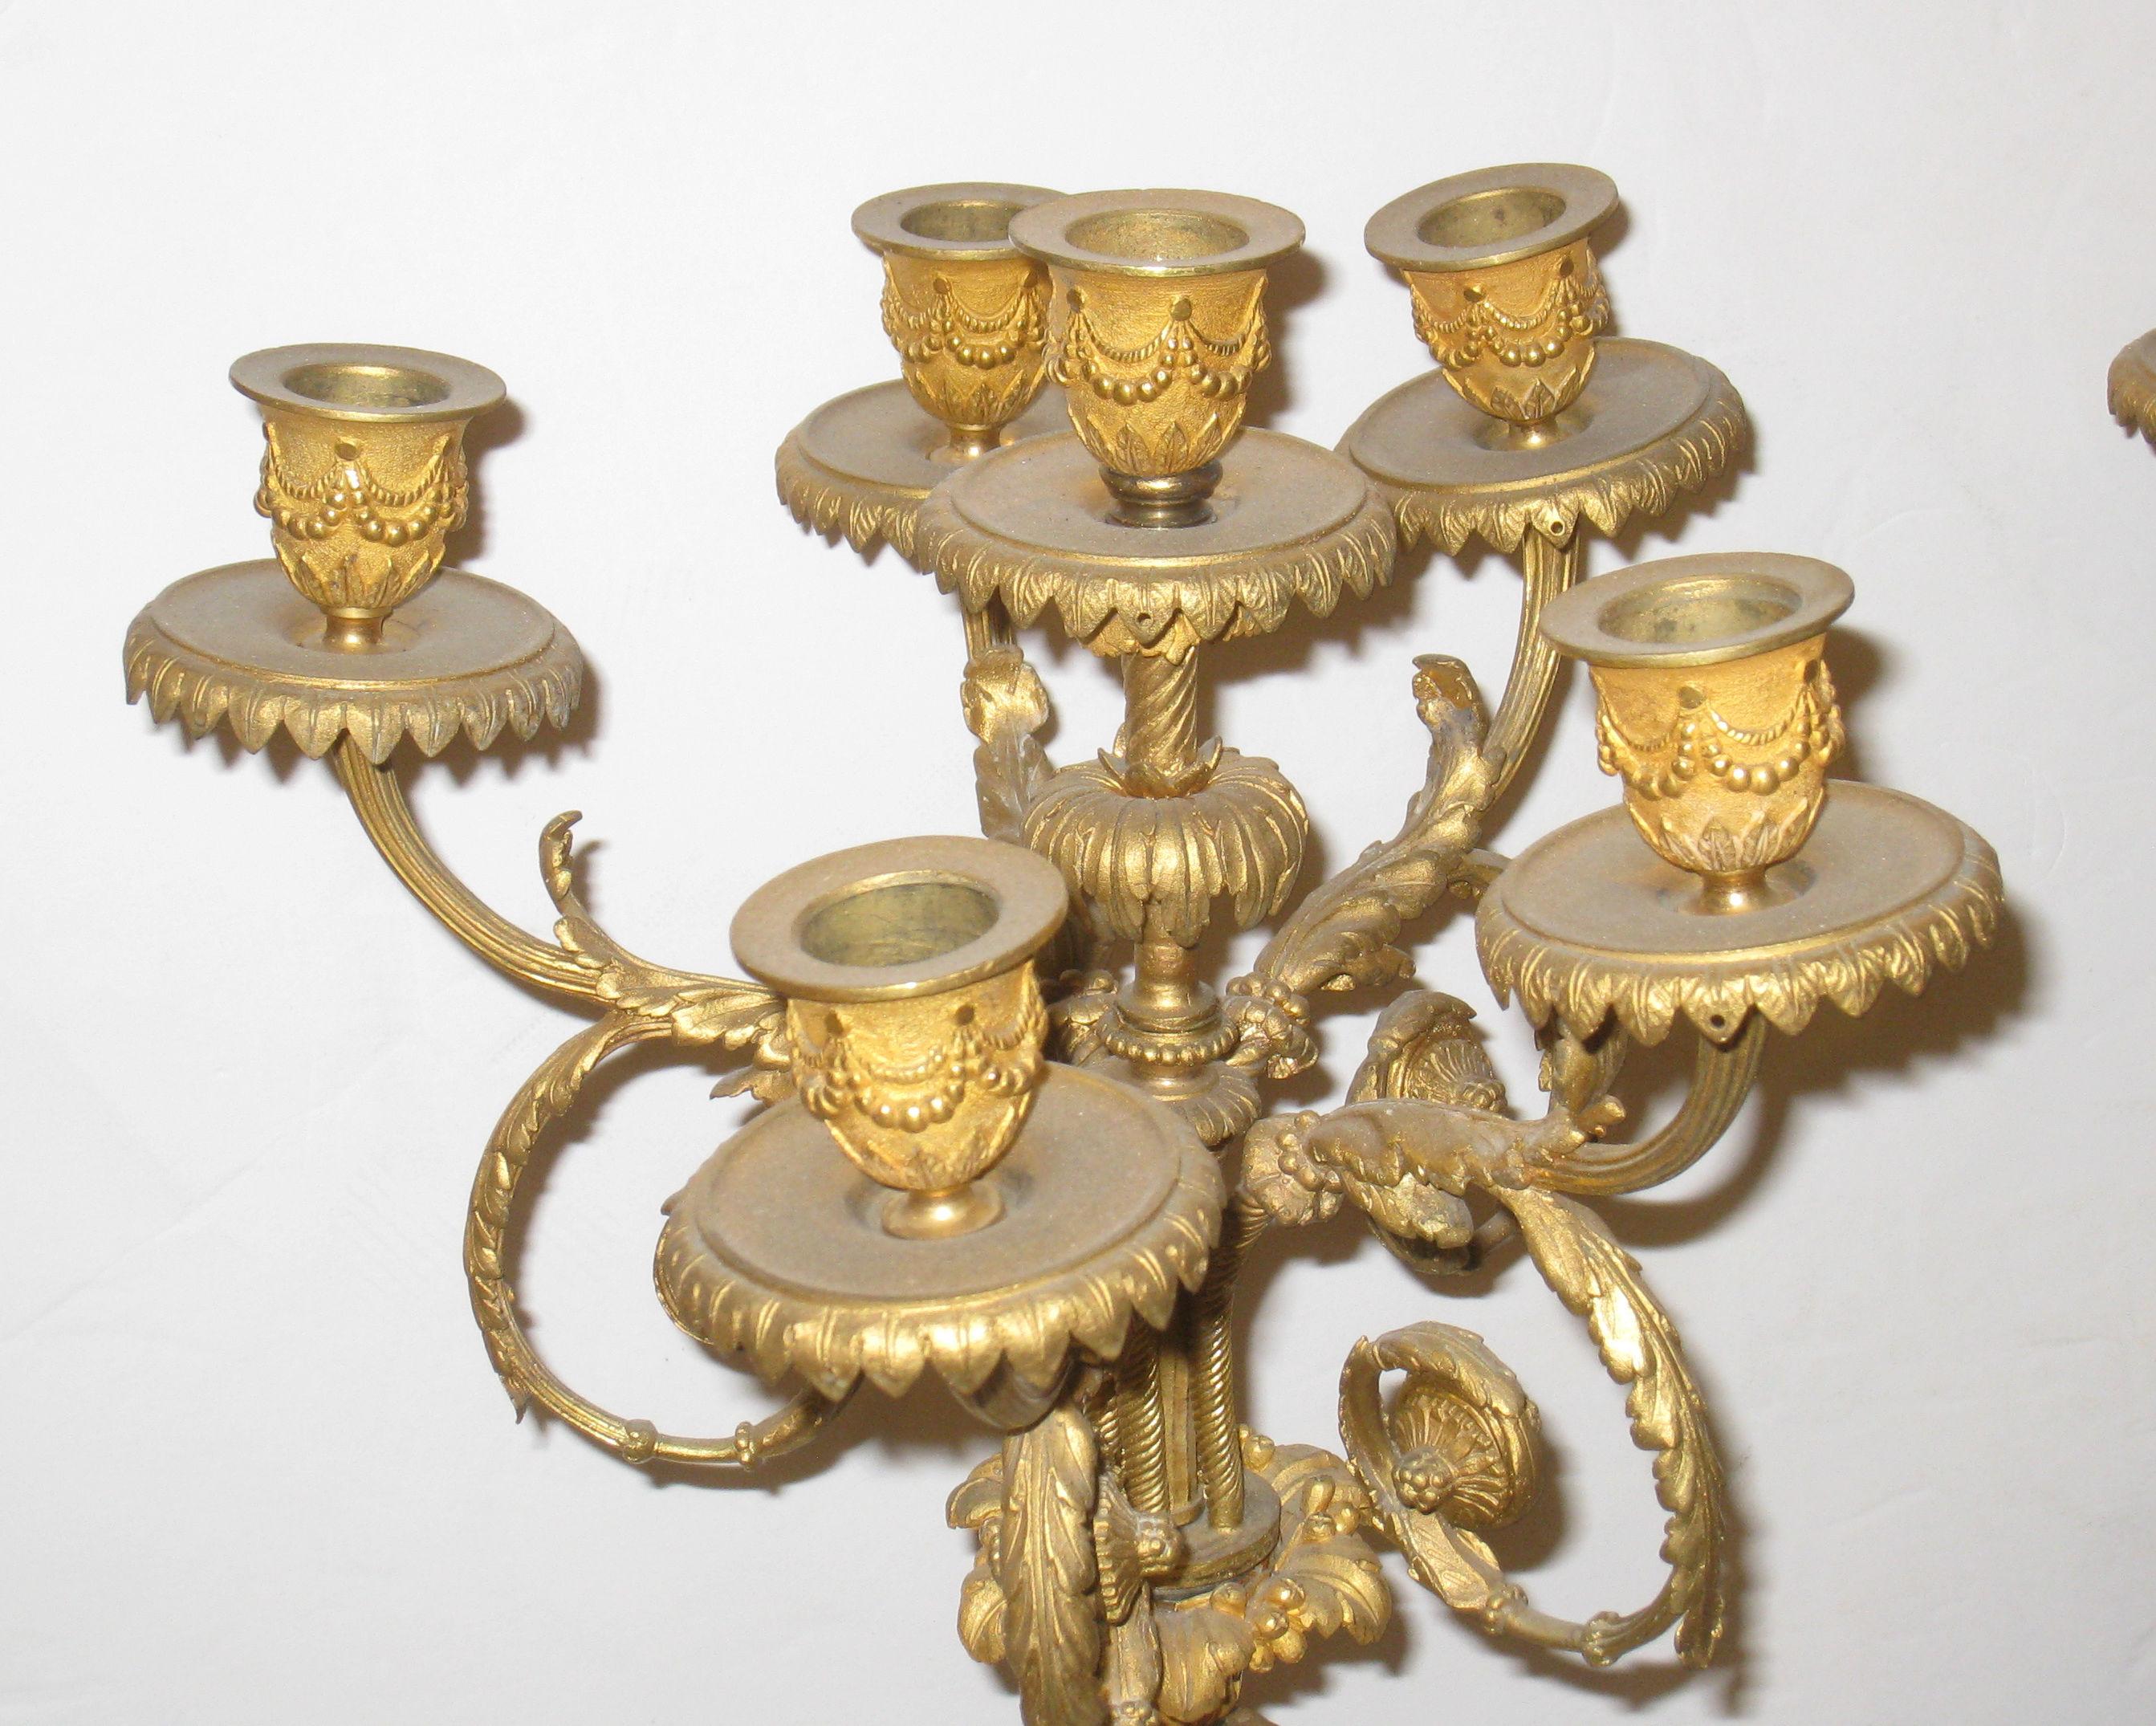 Carved Pair of Gilt and Patinated Figural Bronze and Marble Candelabras